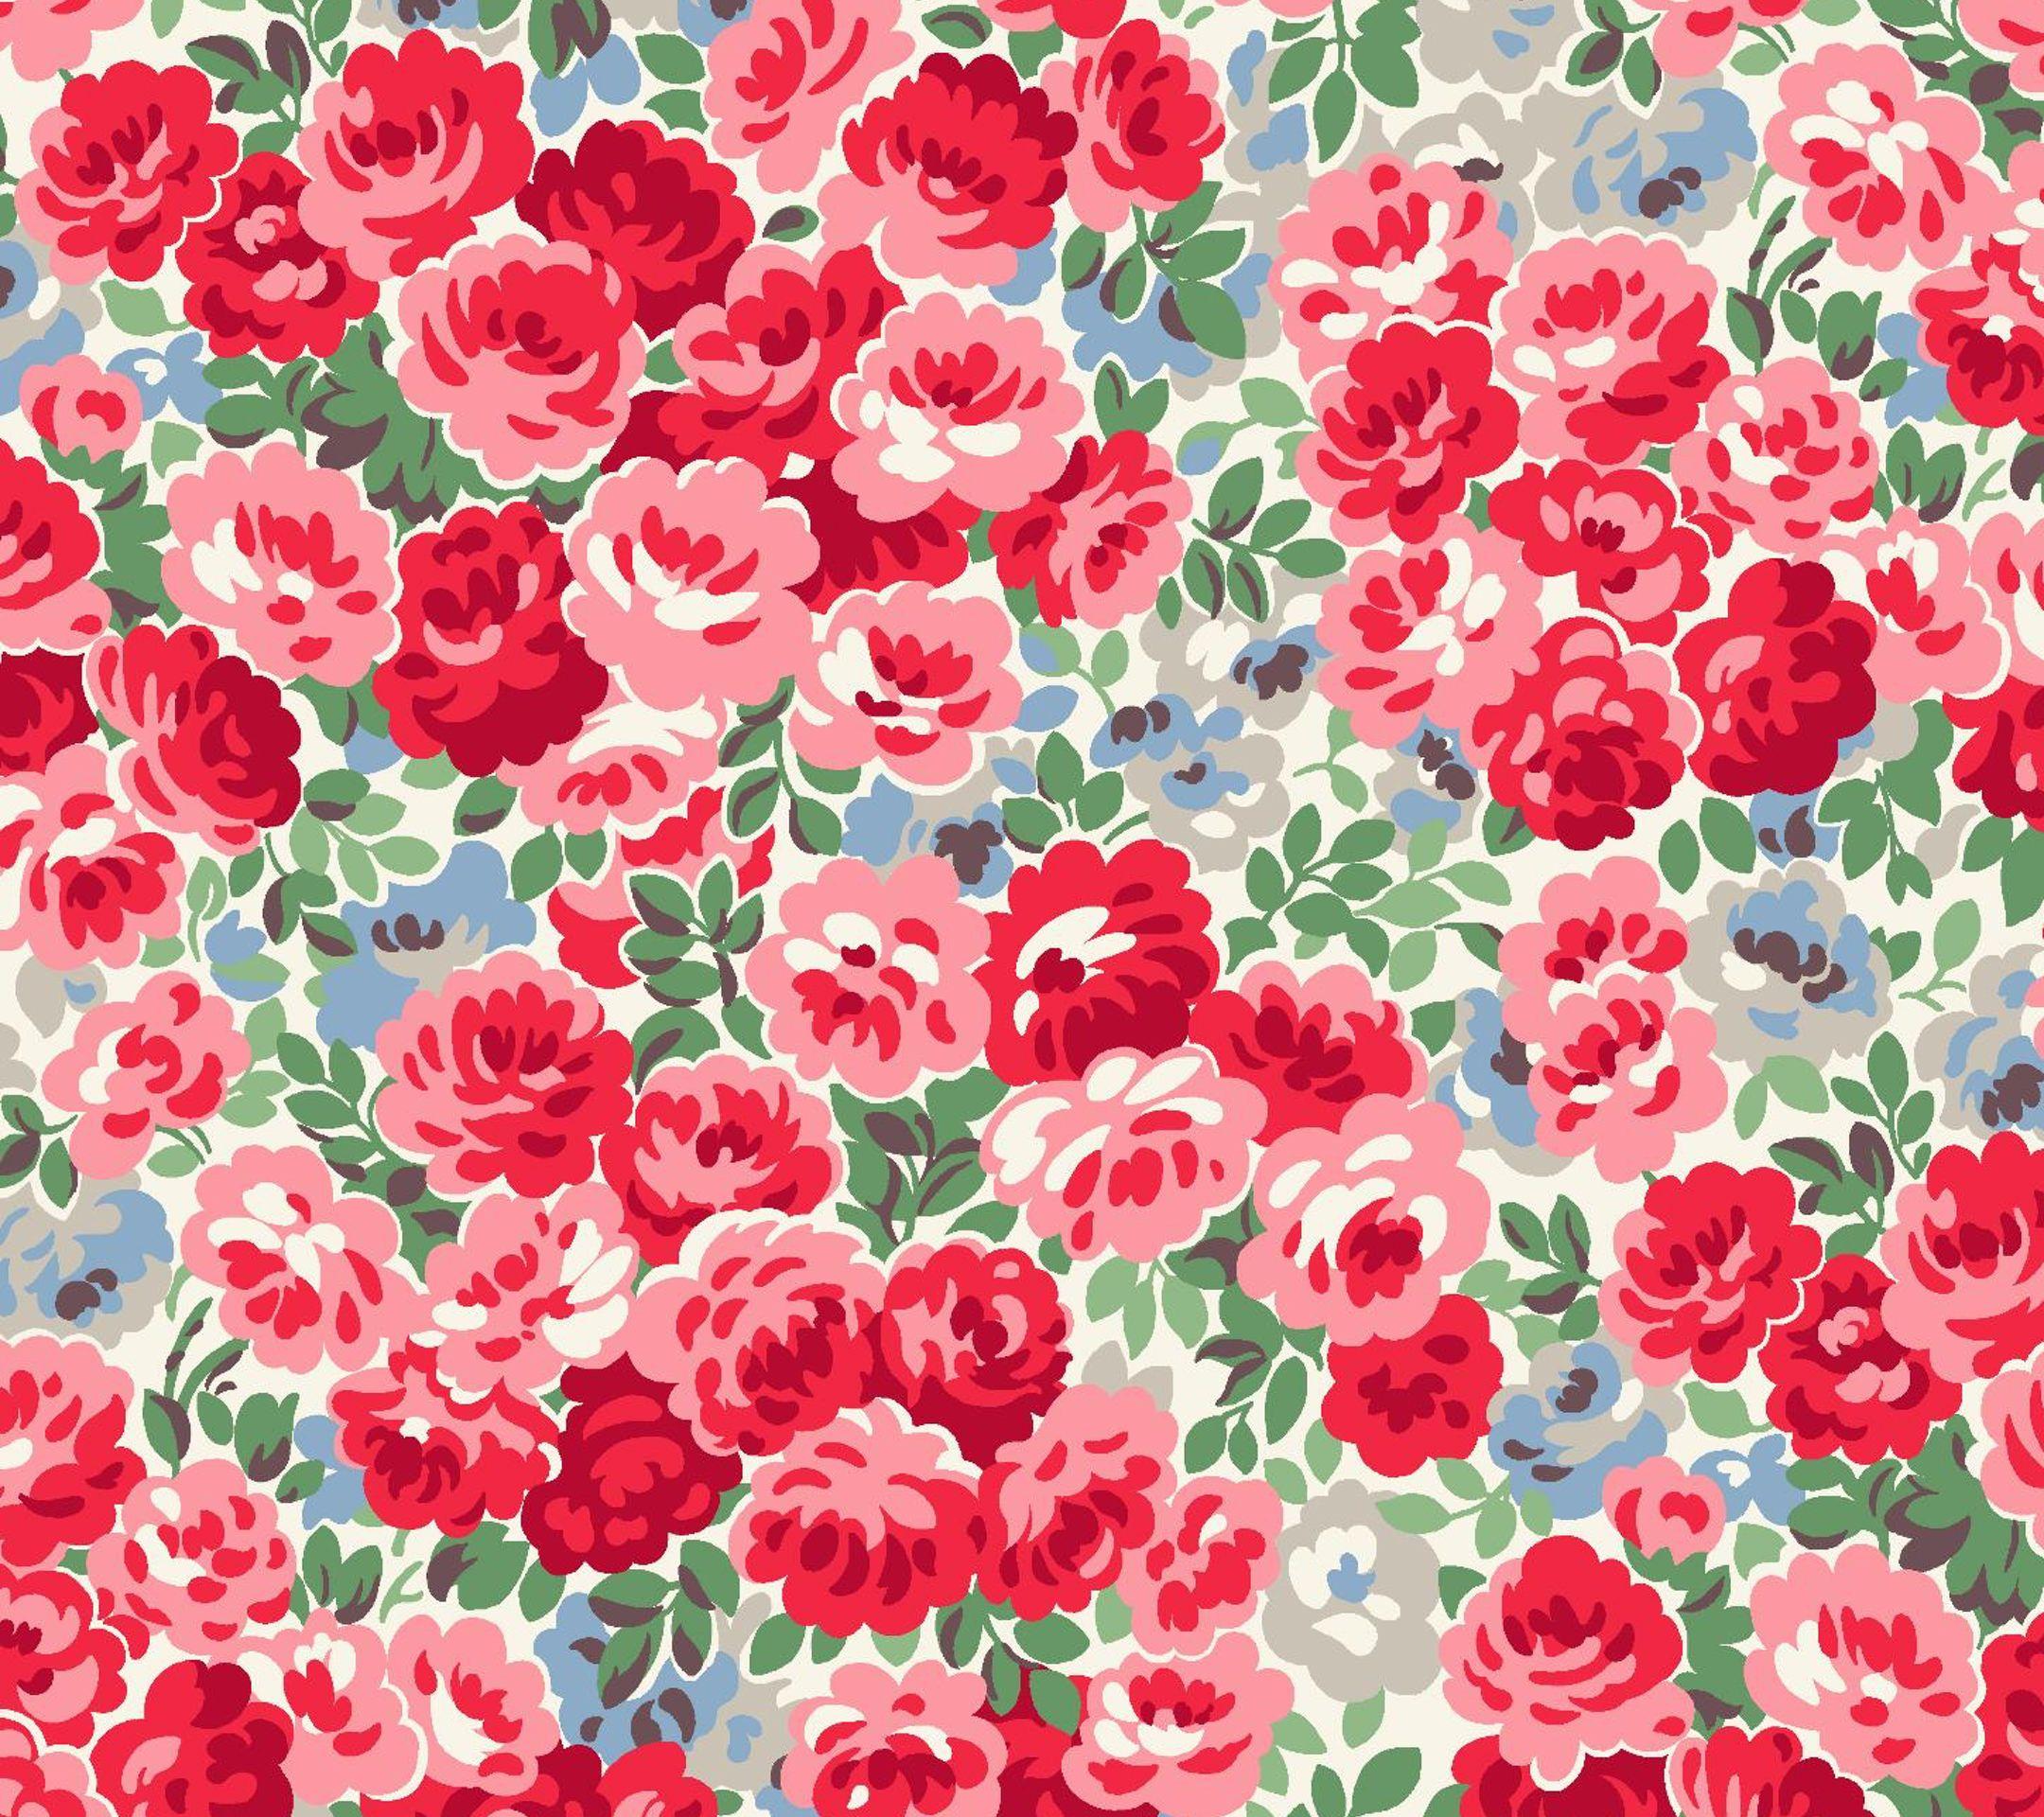 Red floral pattern to see more #flower #pattern wallpaper